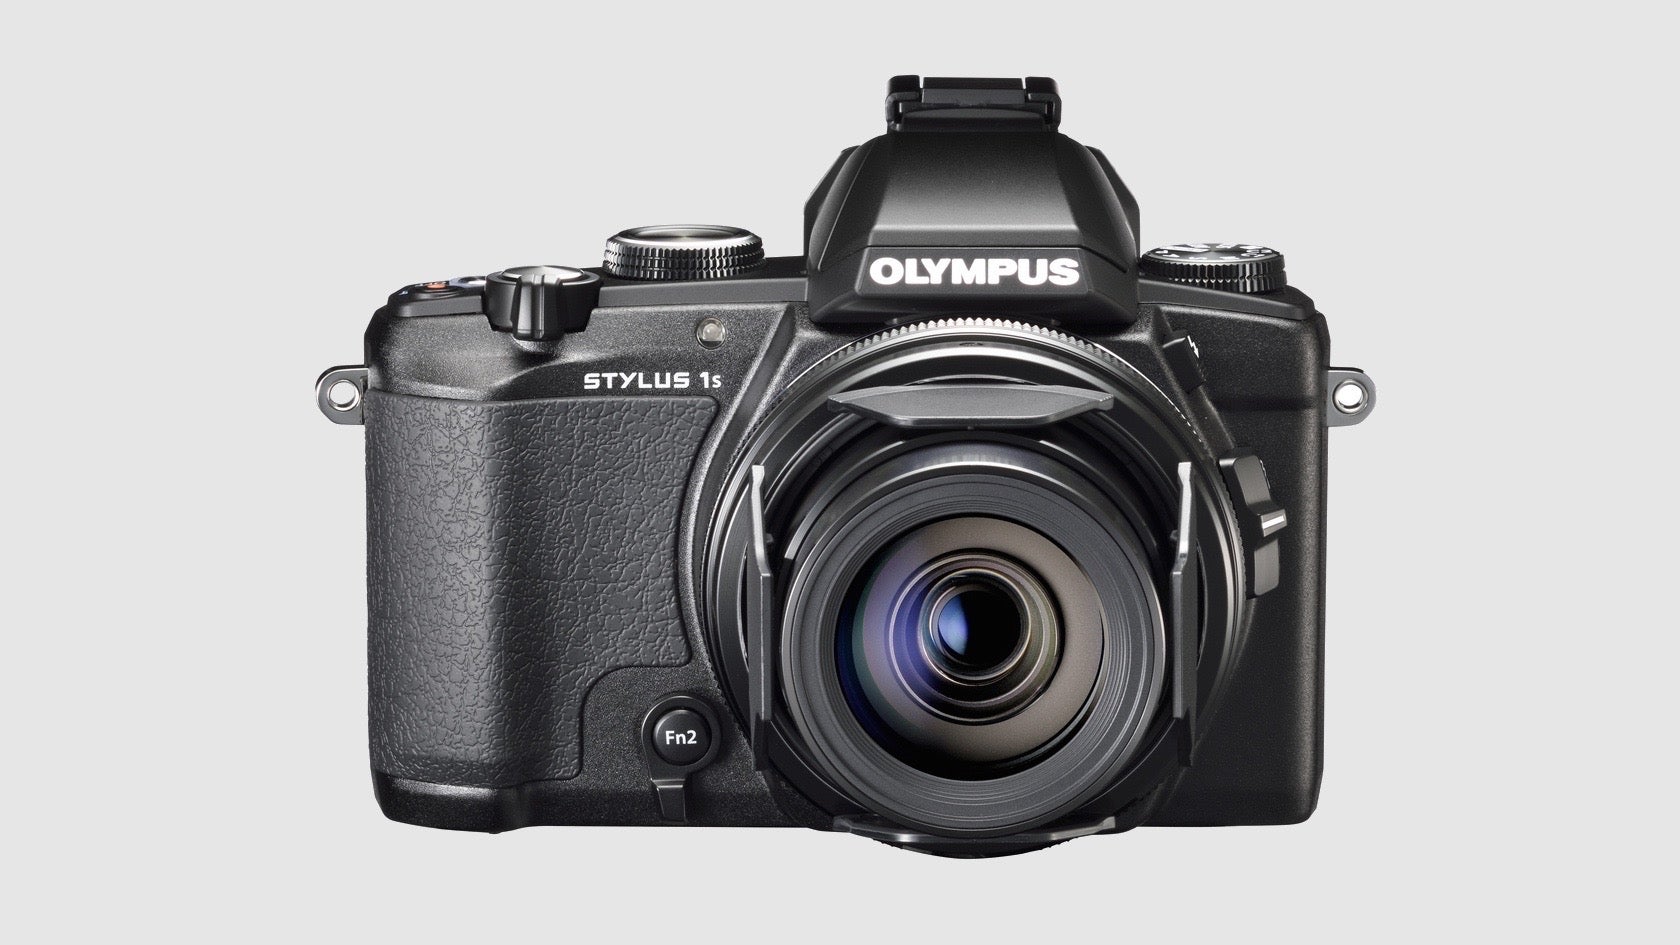 Olympus Stylus 1s high-end compact camera unveiled | Trusted Reviews